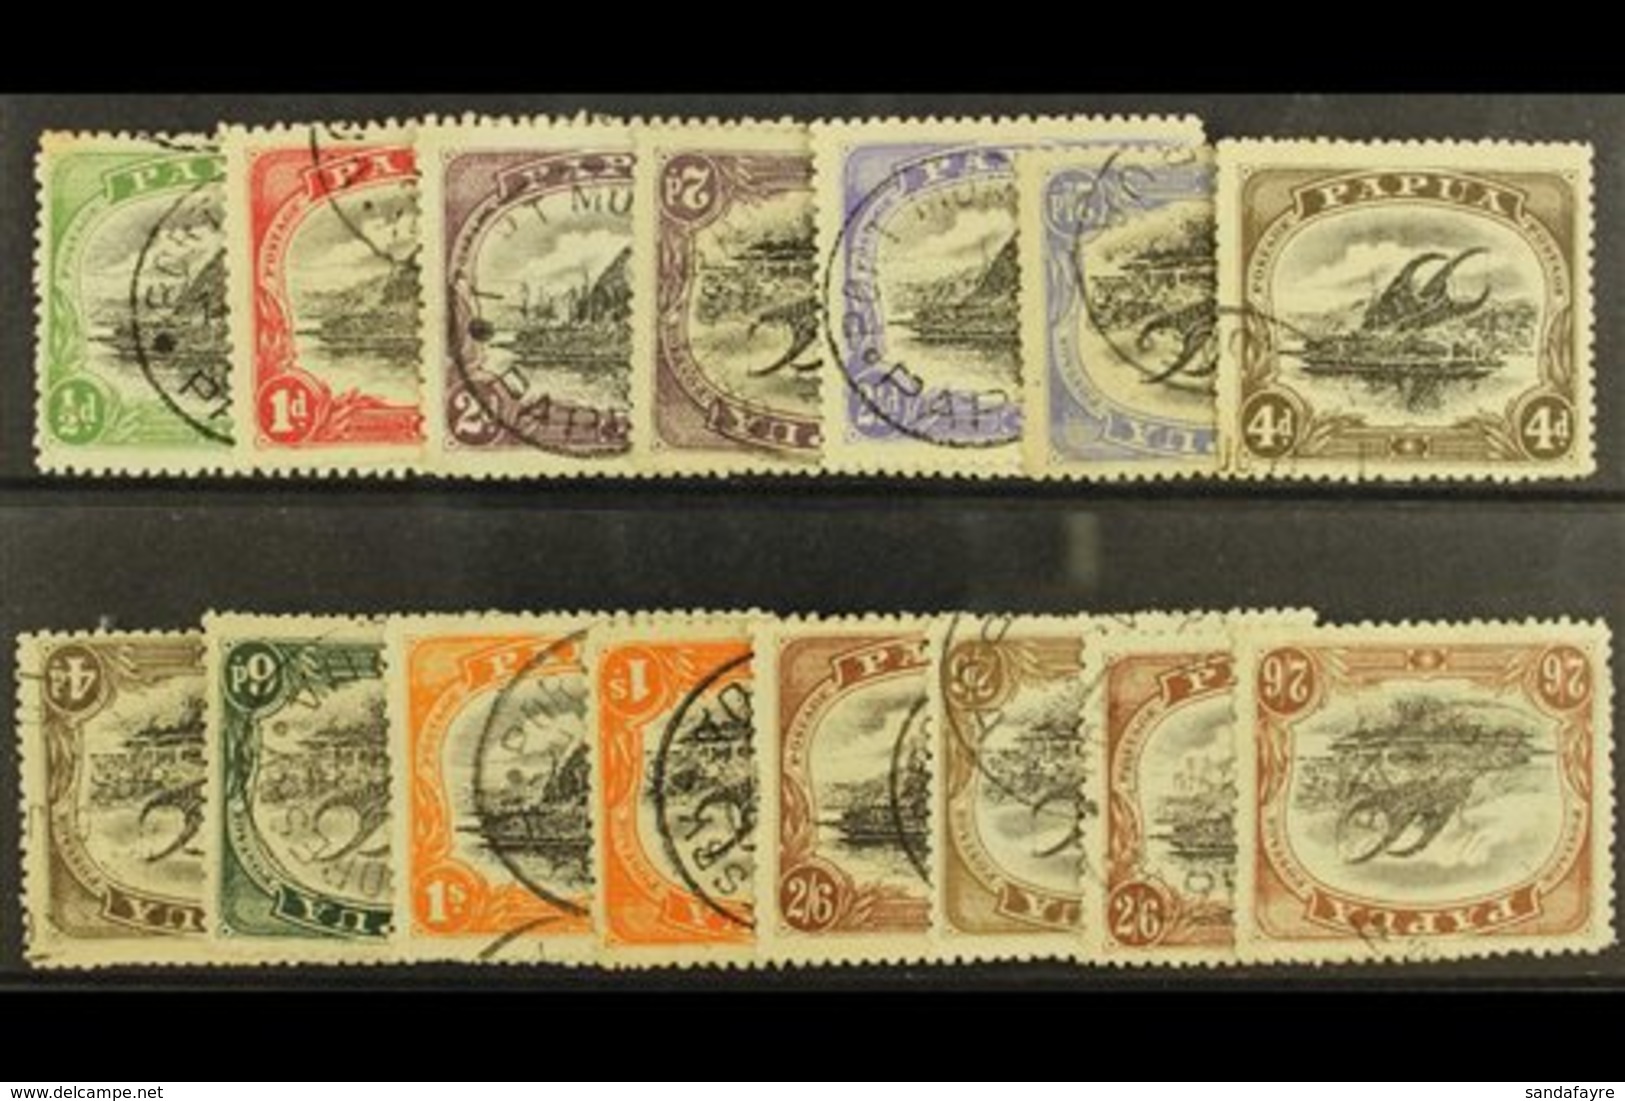 1910-11 Lakatoi Litho Set, SG 75/83 With Both 2s6d Types, With Additional Inverted Watermarks Of 2d, 2½d, 4d, 1s, 2s6d T - Papua-Neuguinea